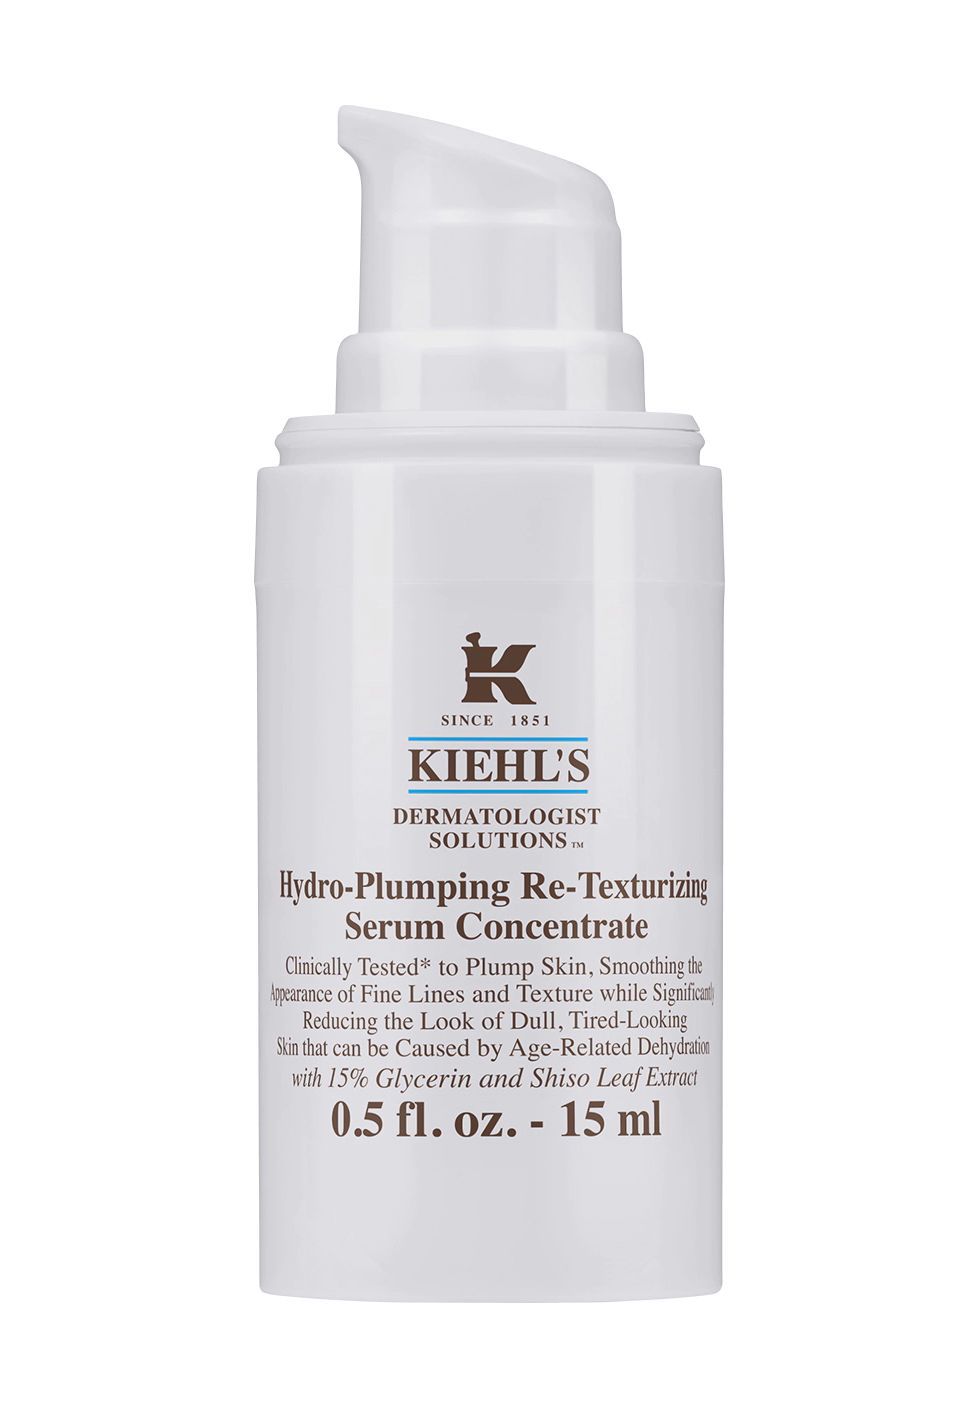 Beauty Pflege Kiehls Hydro-Plumping Re-Texturizing Serum Concentrate Gesichtscreme